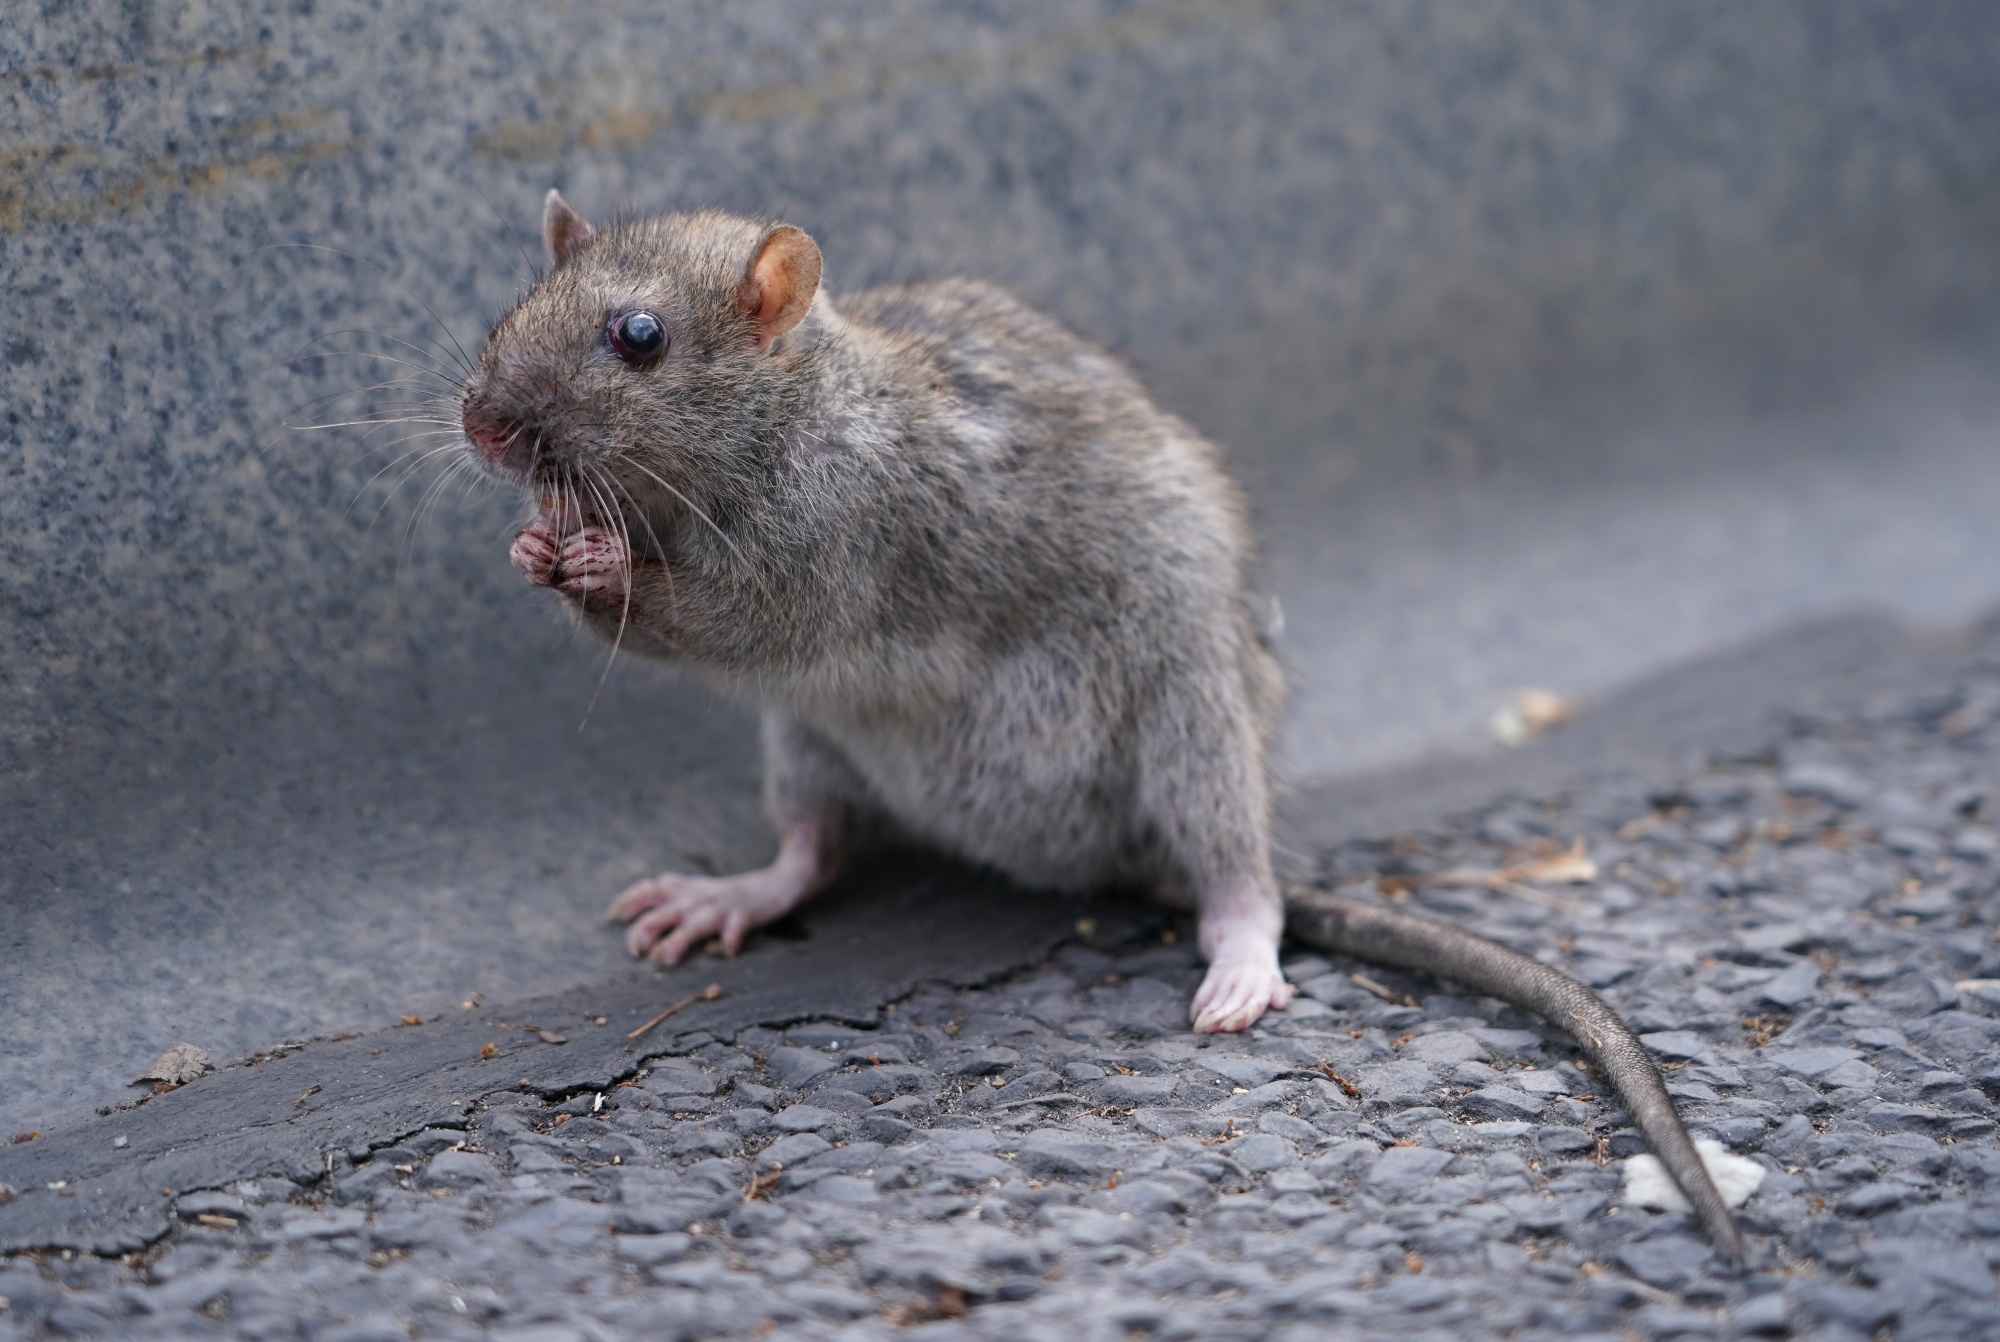 in Commercial Project Based Rodent Control Services, India